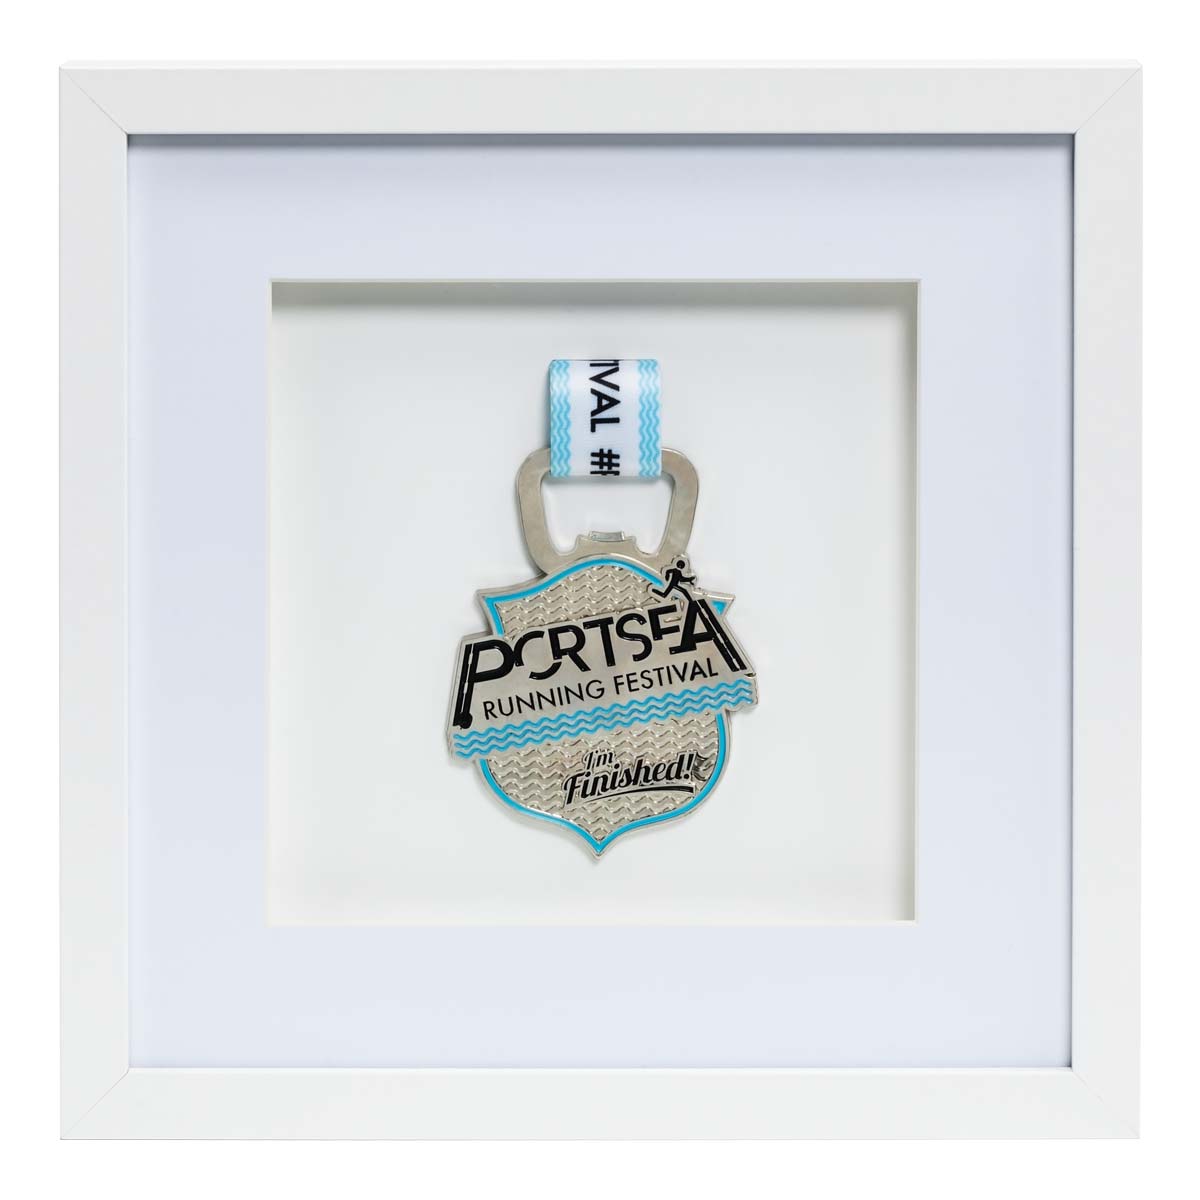 Silver medal from the Portsea Running festival framed in a white square frame, front on angle